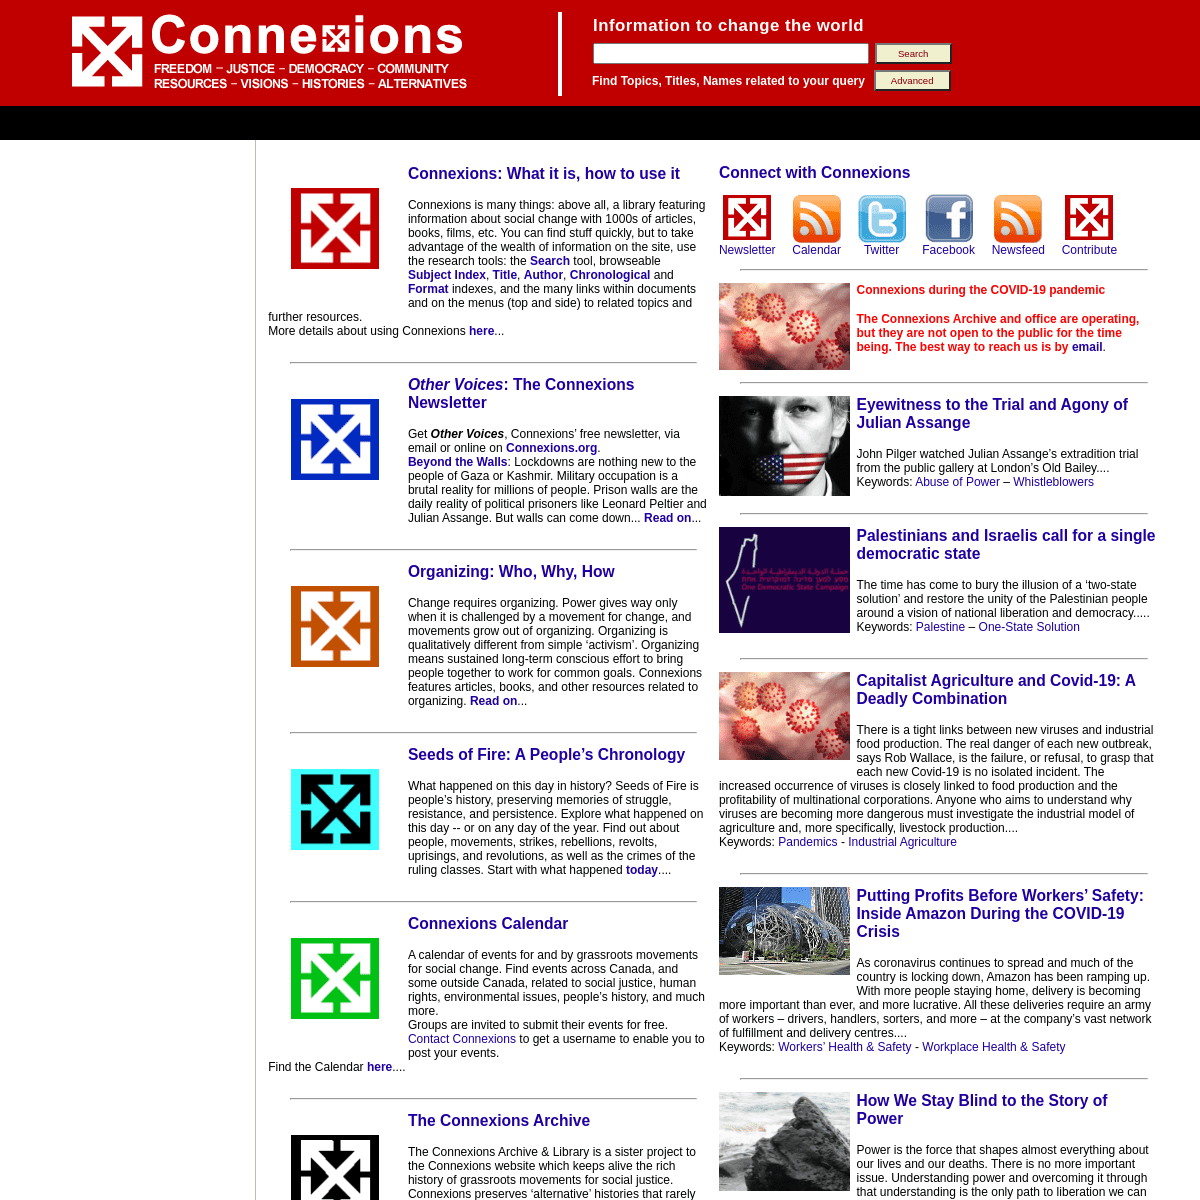 A complete backup of https://connexions.org